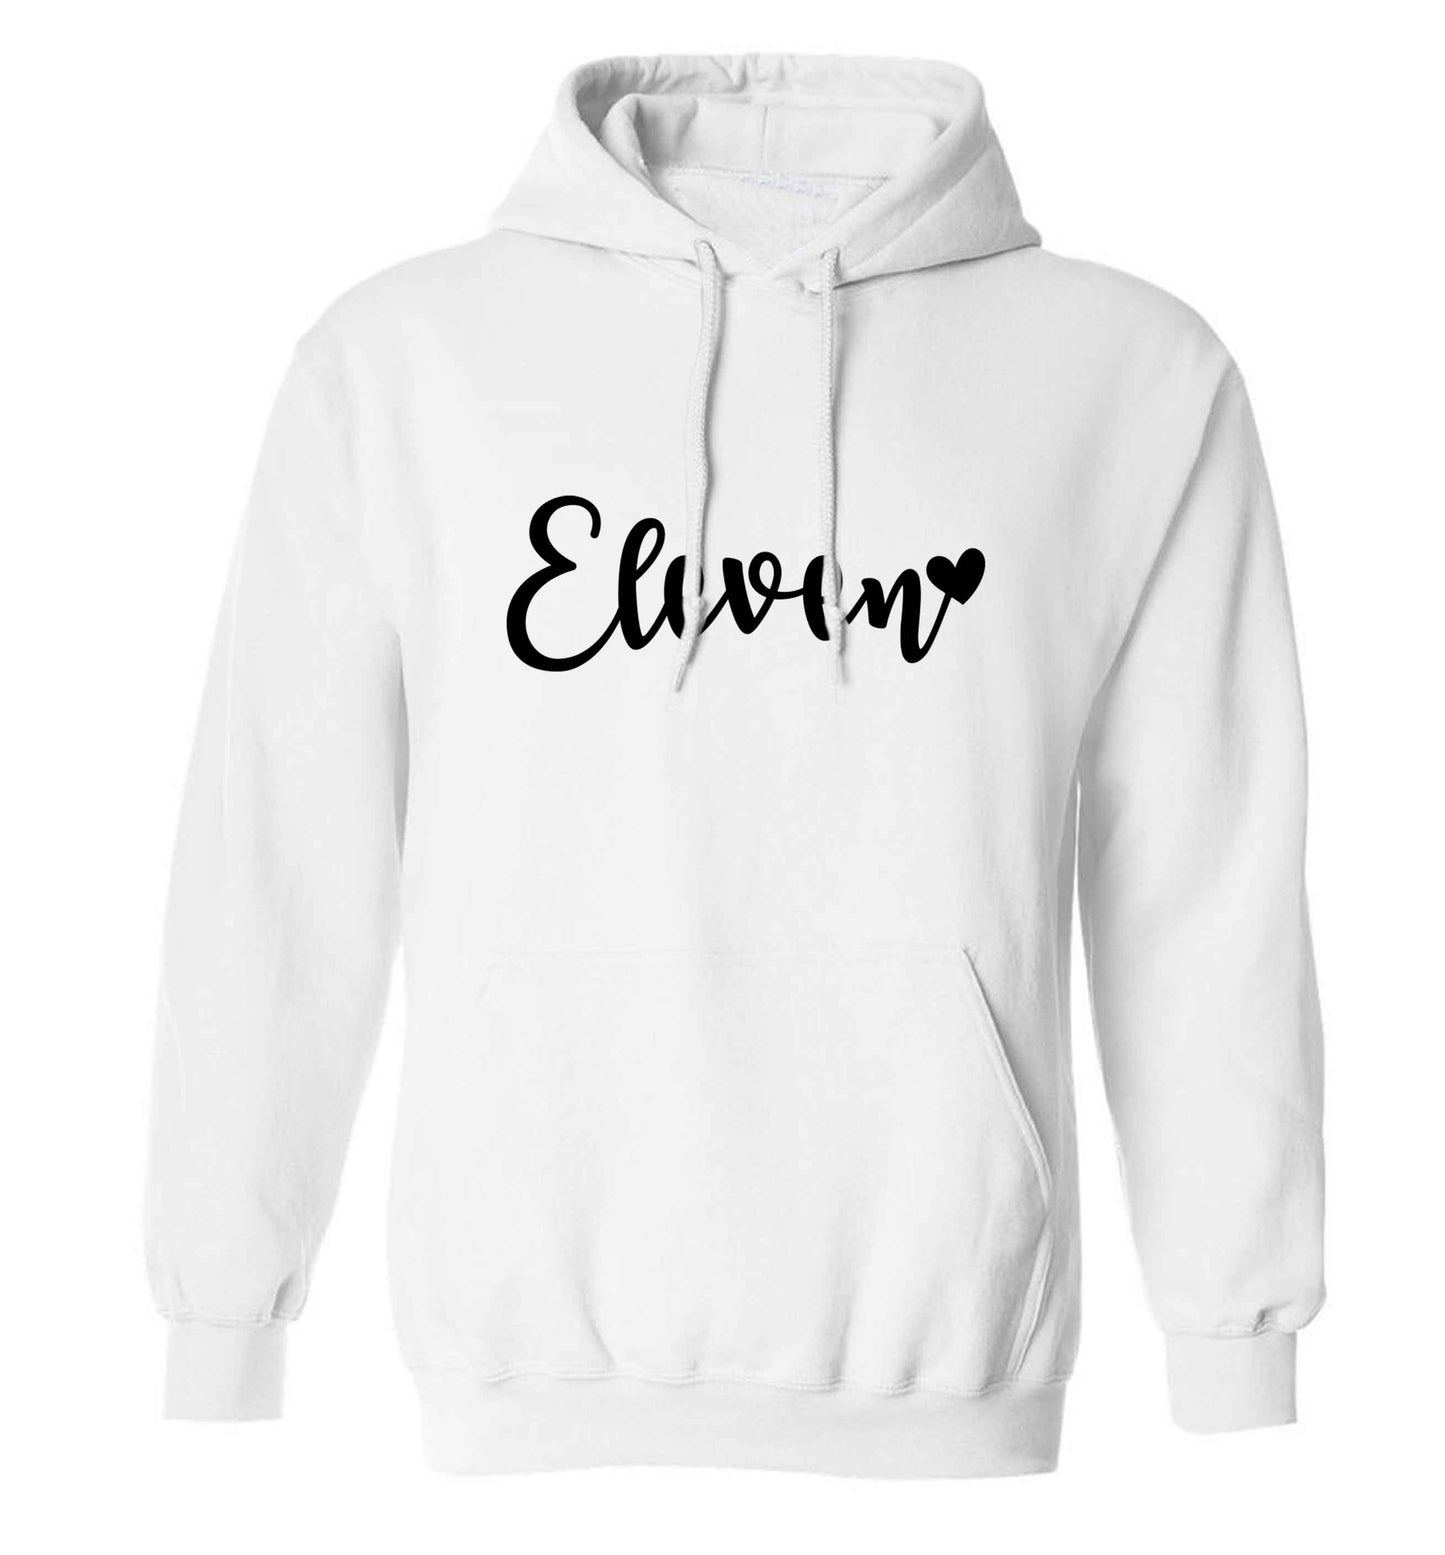 Eleven and heart! adults unisex white hoodie 2XL